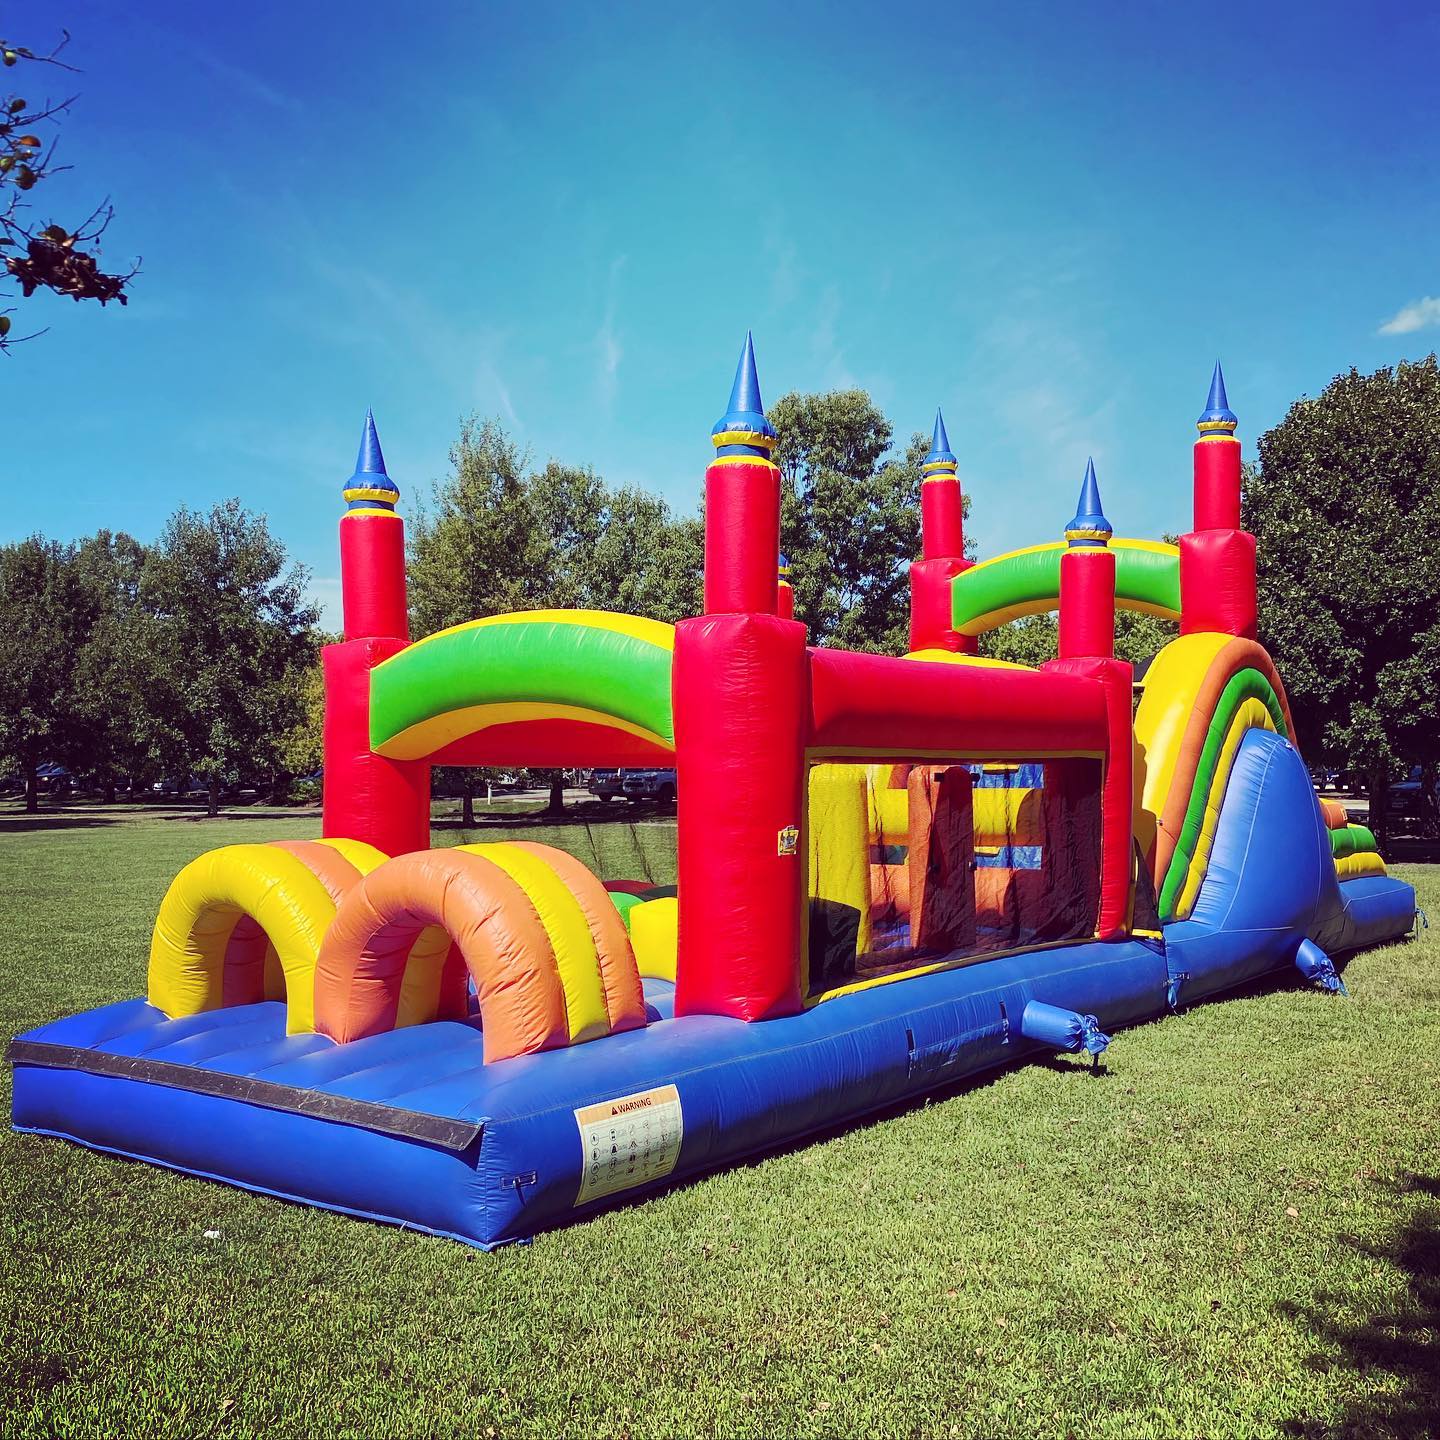 Surry Obstacle Course Rentals